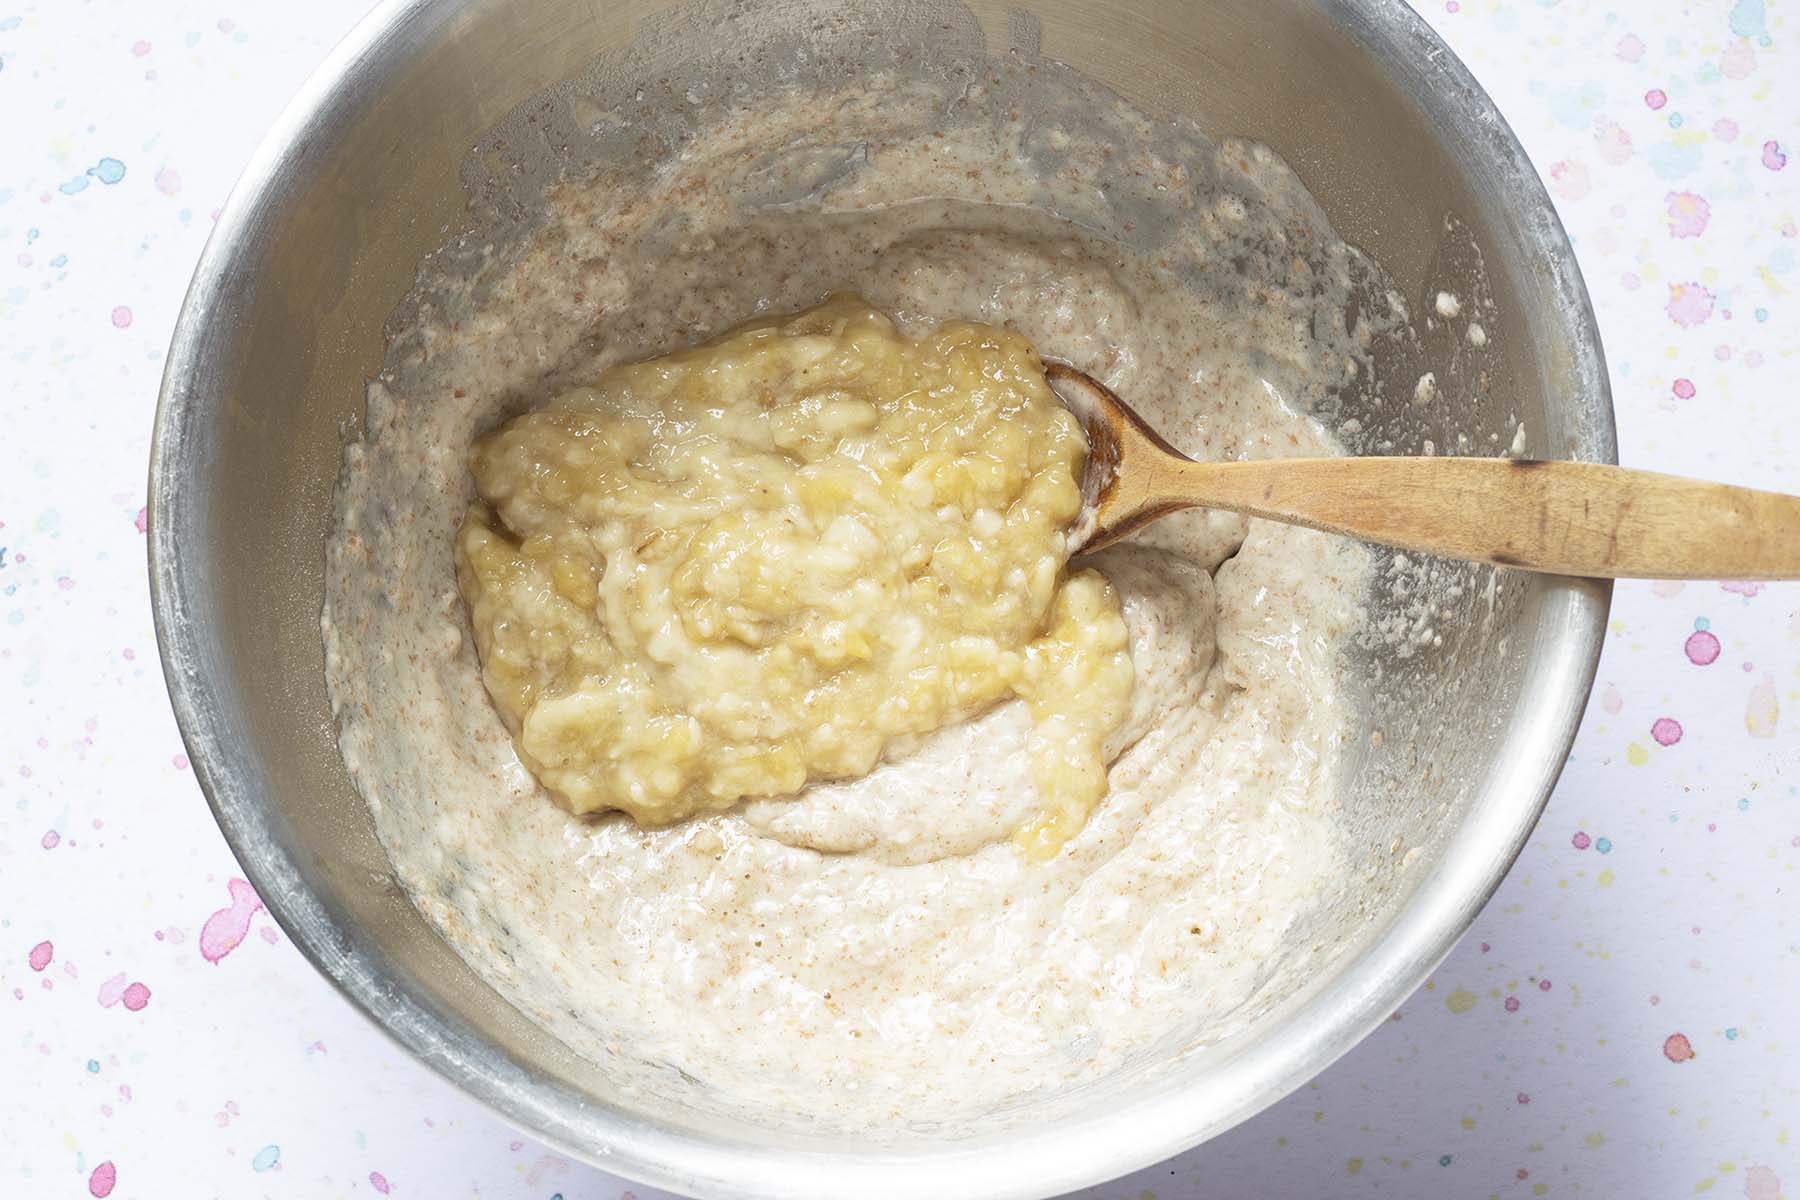 muffin batter in bowl with mashed banana